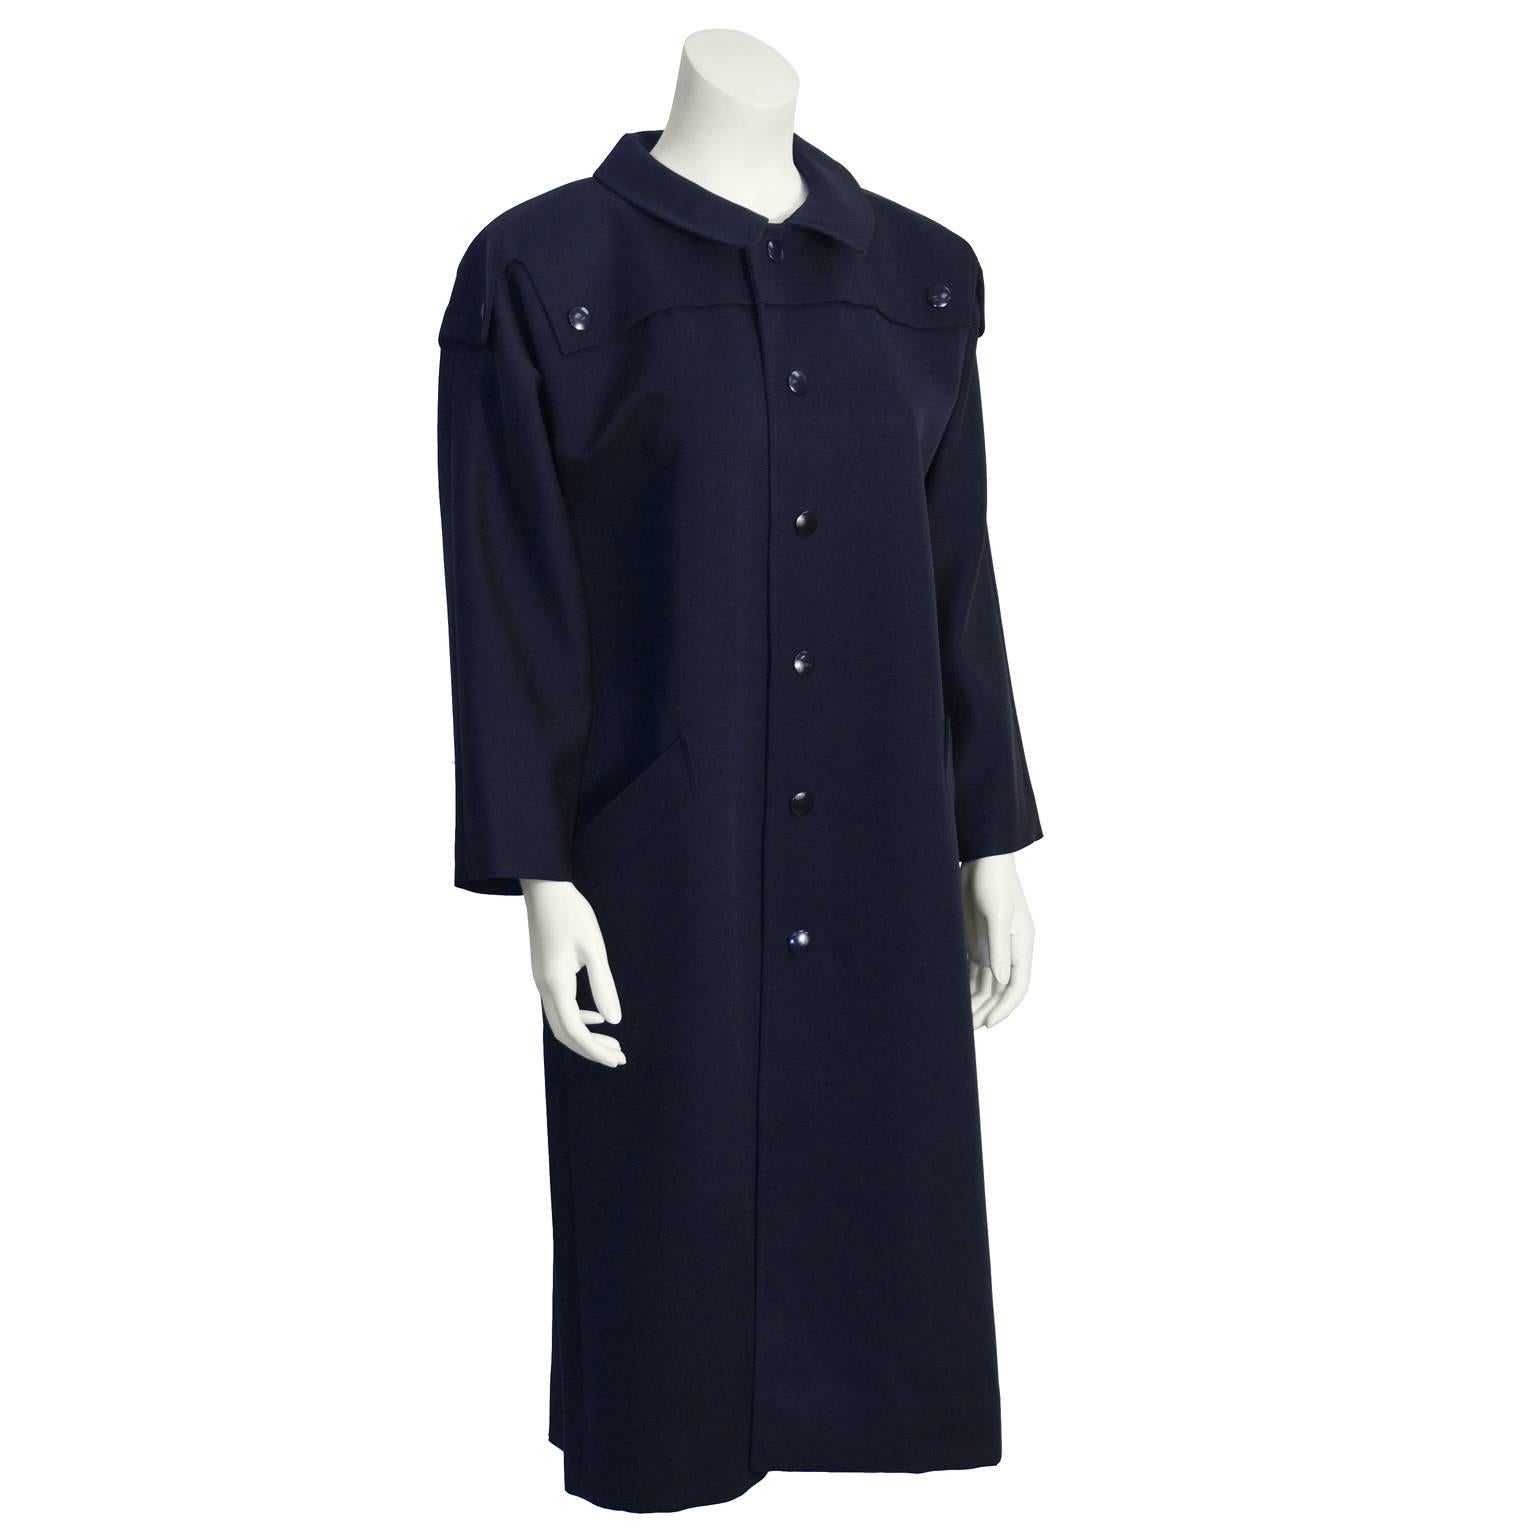 This Pierre Cardin trench coat from the 1970's features a Peter Pan style rounded collar, a storm flap attached with buttons, front button closure and two broad welt side pockets. Snap buttons are navy plastic. Excellent vintage condition. Fits like